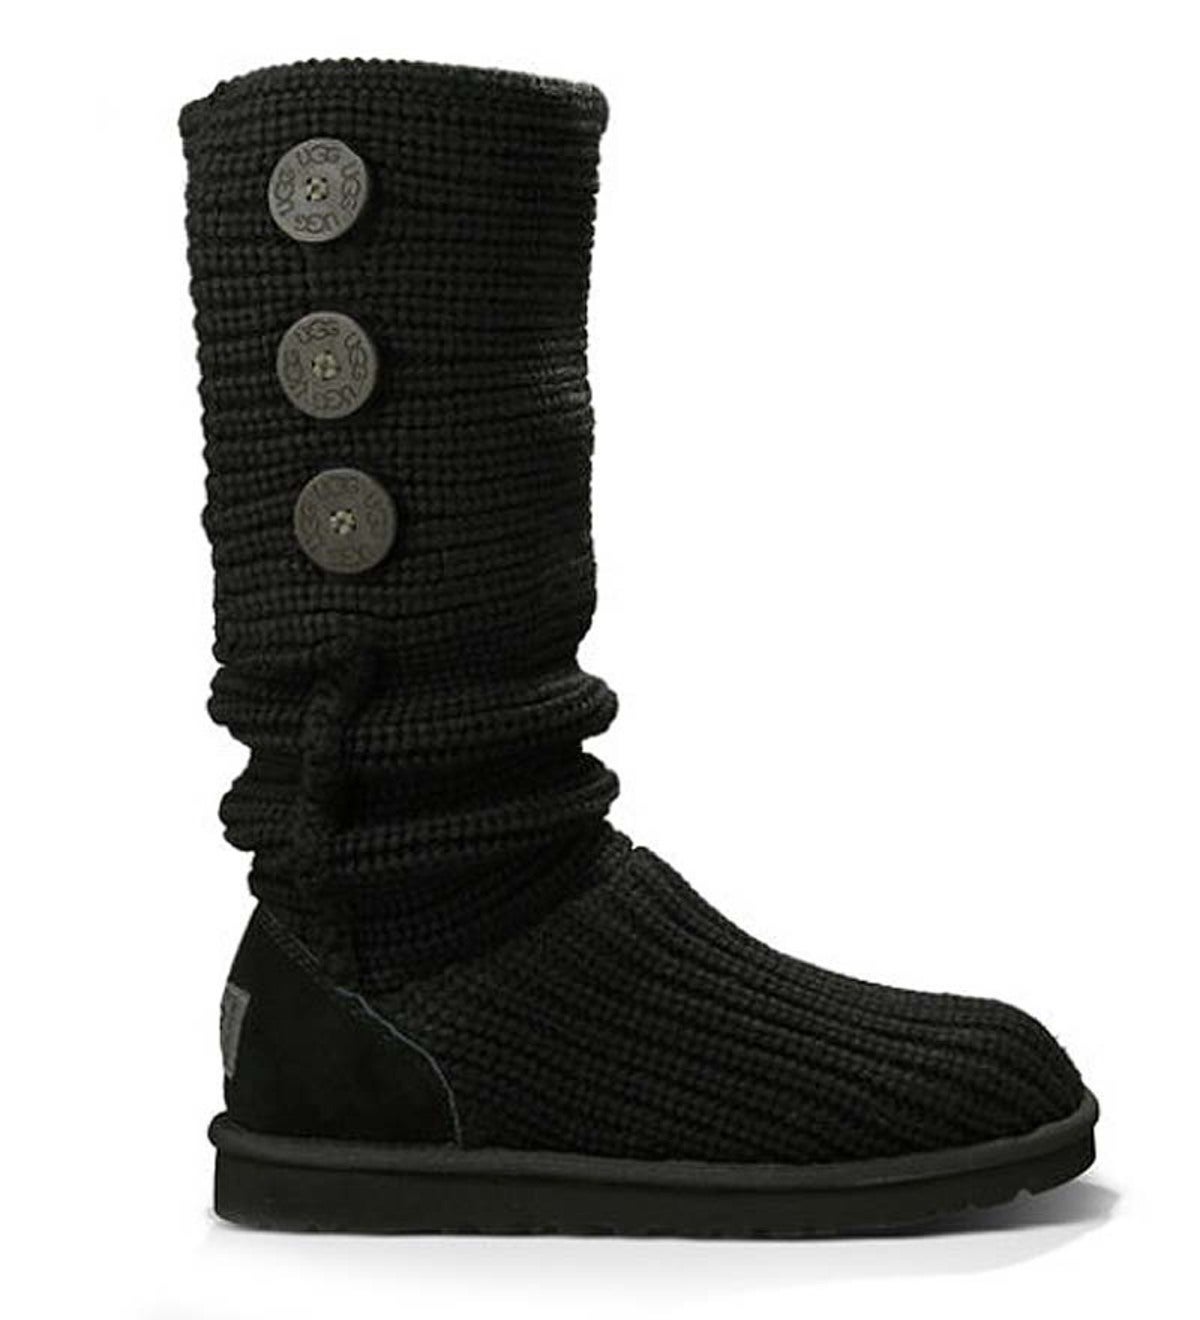 UGG® Australia Women's Soft-Knit Cardy Boot with Button Accents - Black ...